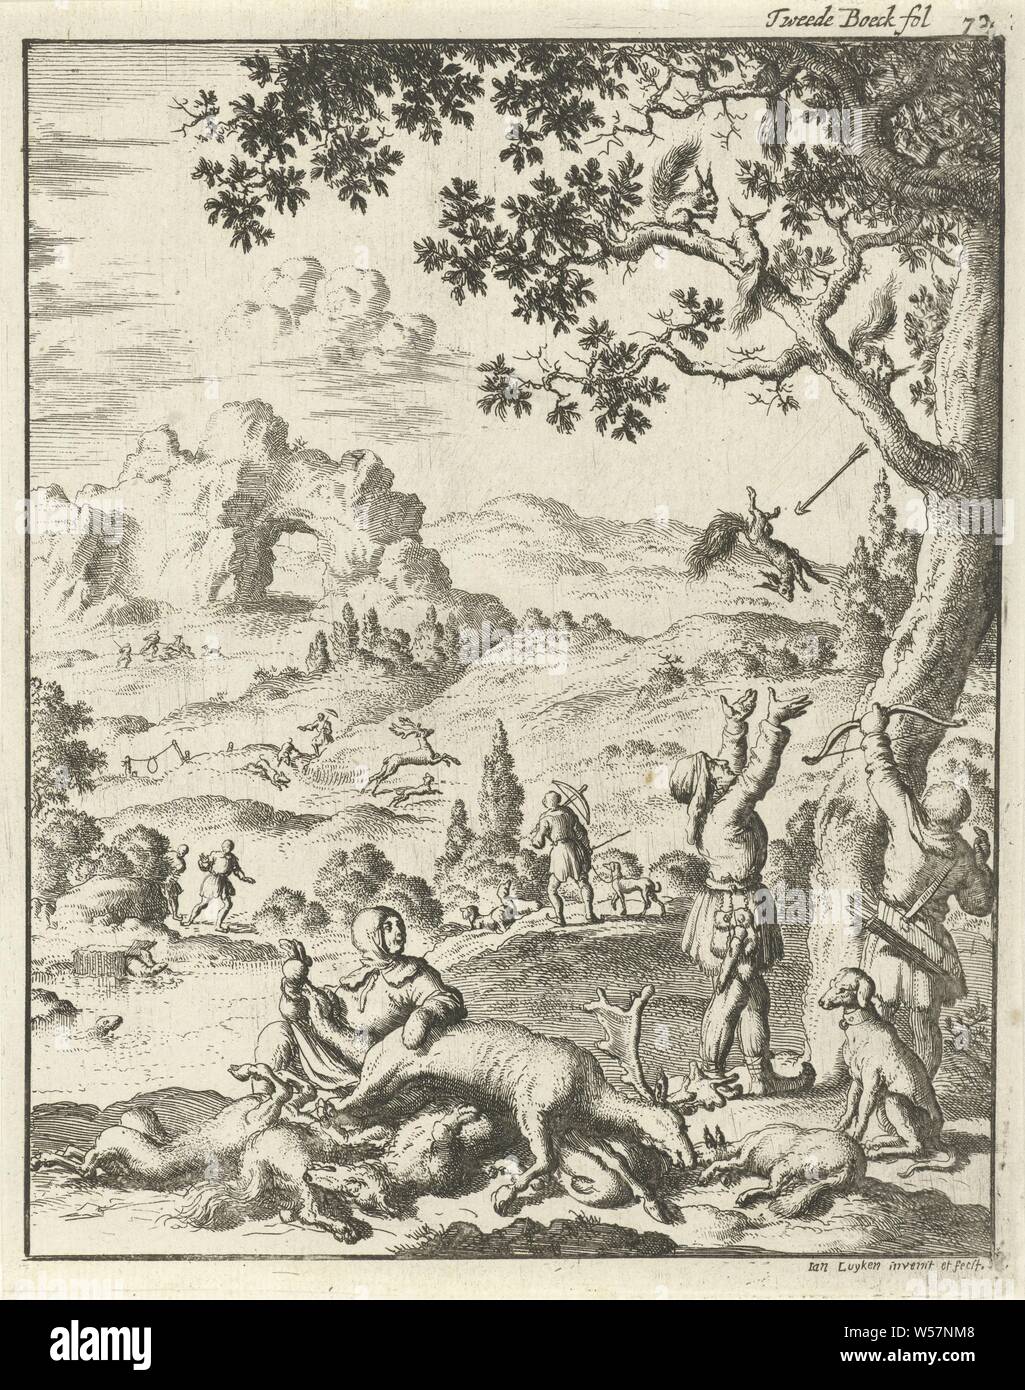 Laplanders on the hunt, Jan Luyken (mentioned on object), Amsterdam, 1682, paper, etching, h 170 mm × w 135 mm Stock Photo